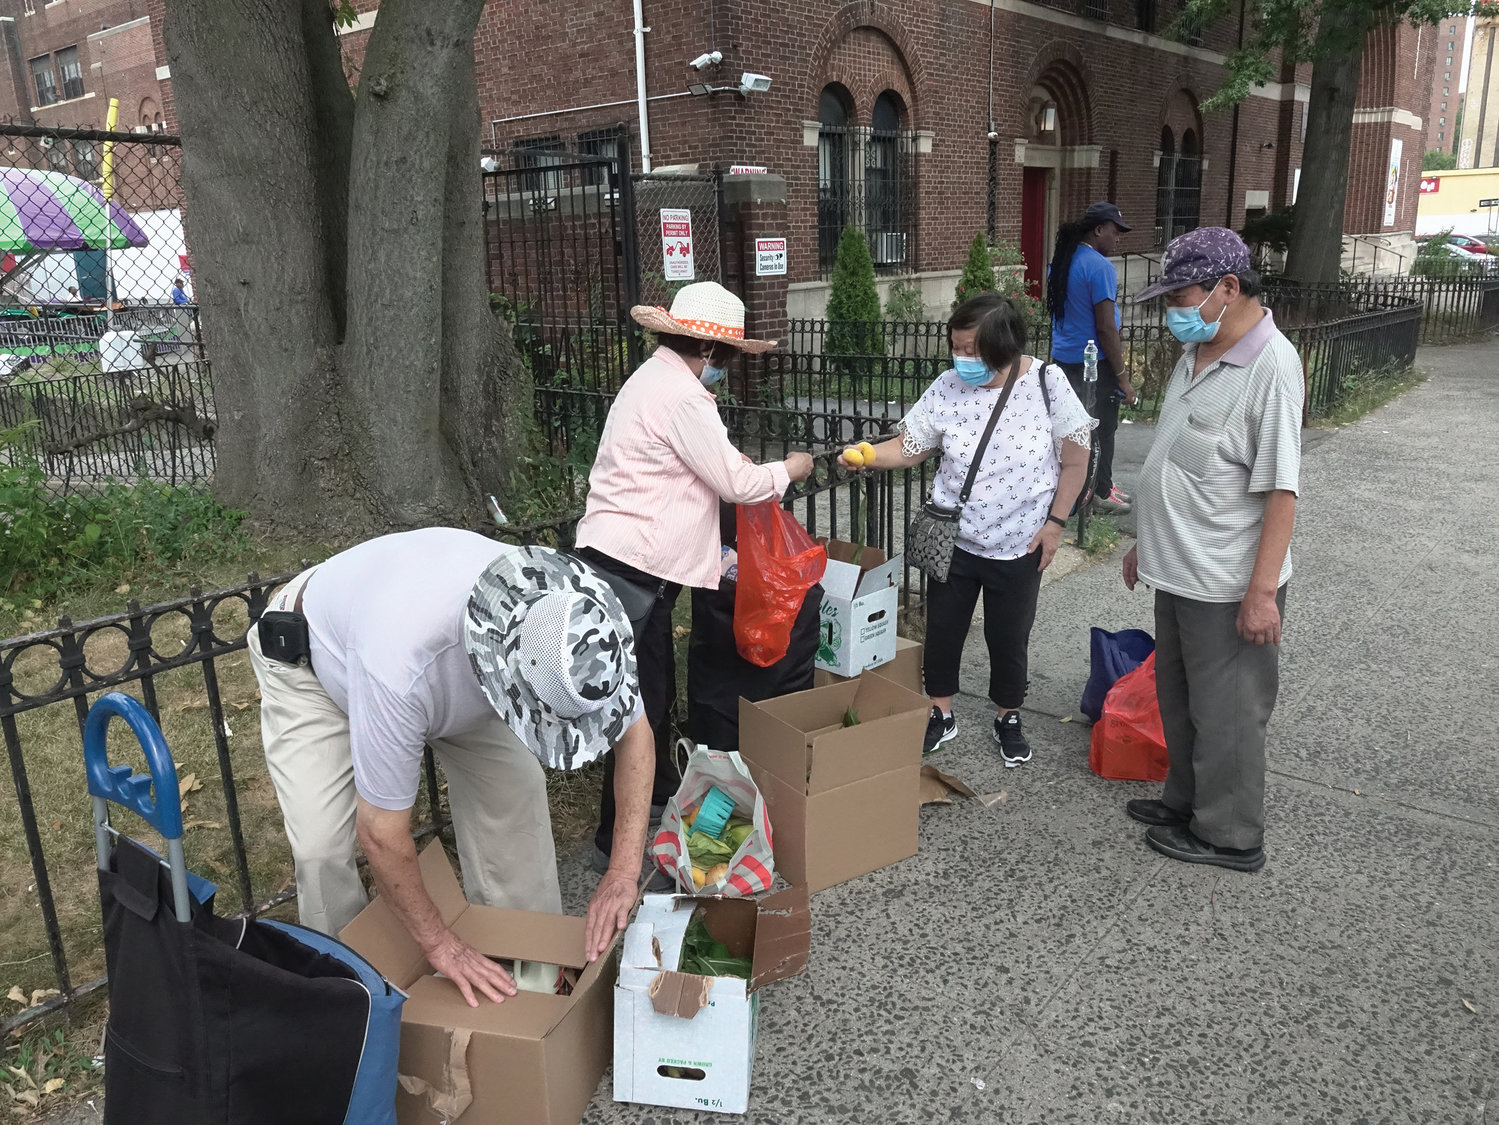 Some recipients of the archdiocesan Catholic Charities pop-up food pantry in the Bronx trade food items during the Aug. 26 event at St. Helena parish on Olmstead Avenue.